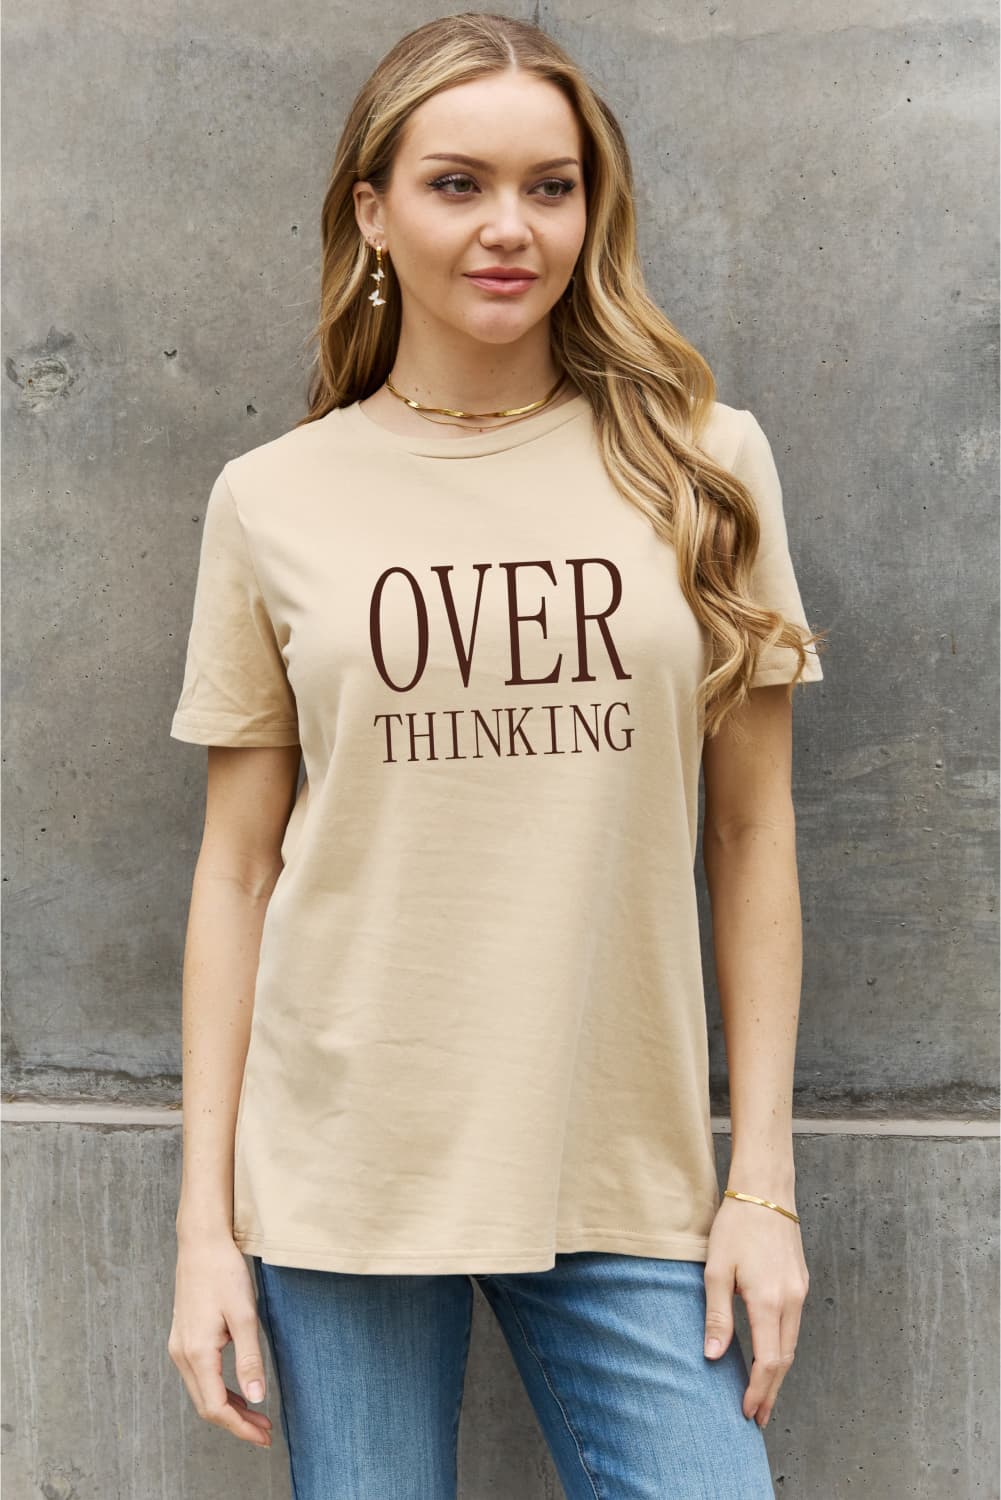 Simply Love Full Size OVER THINKING Graphic Cotton Tee